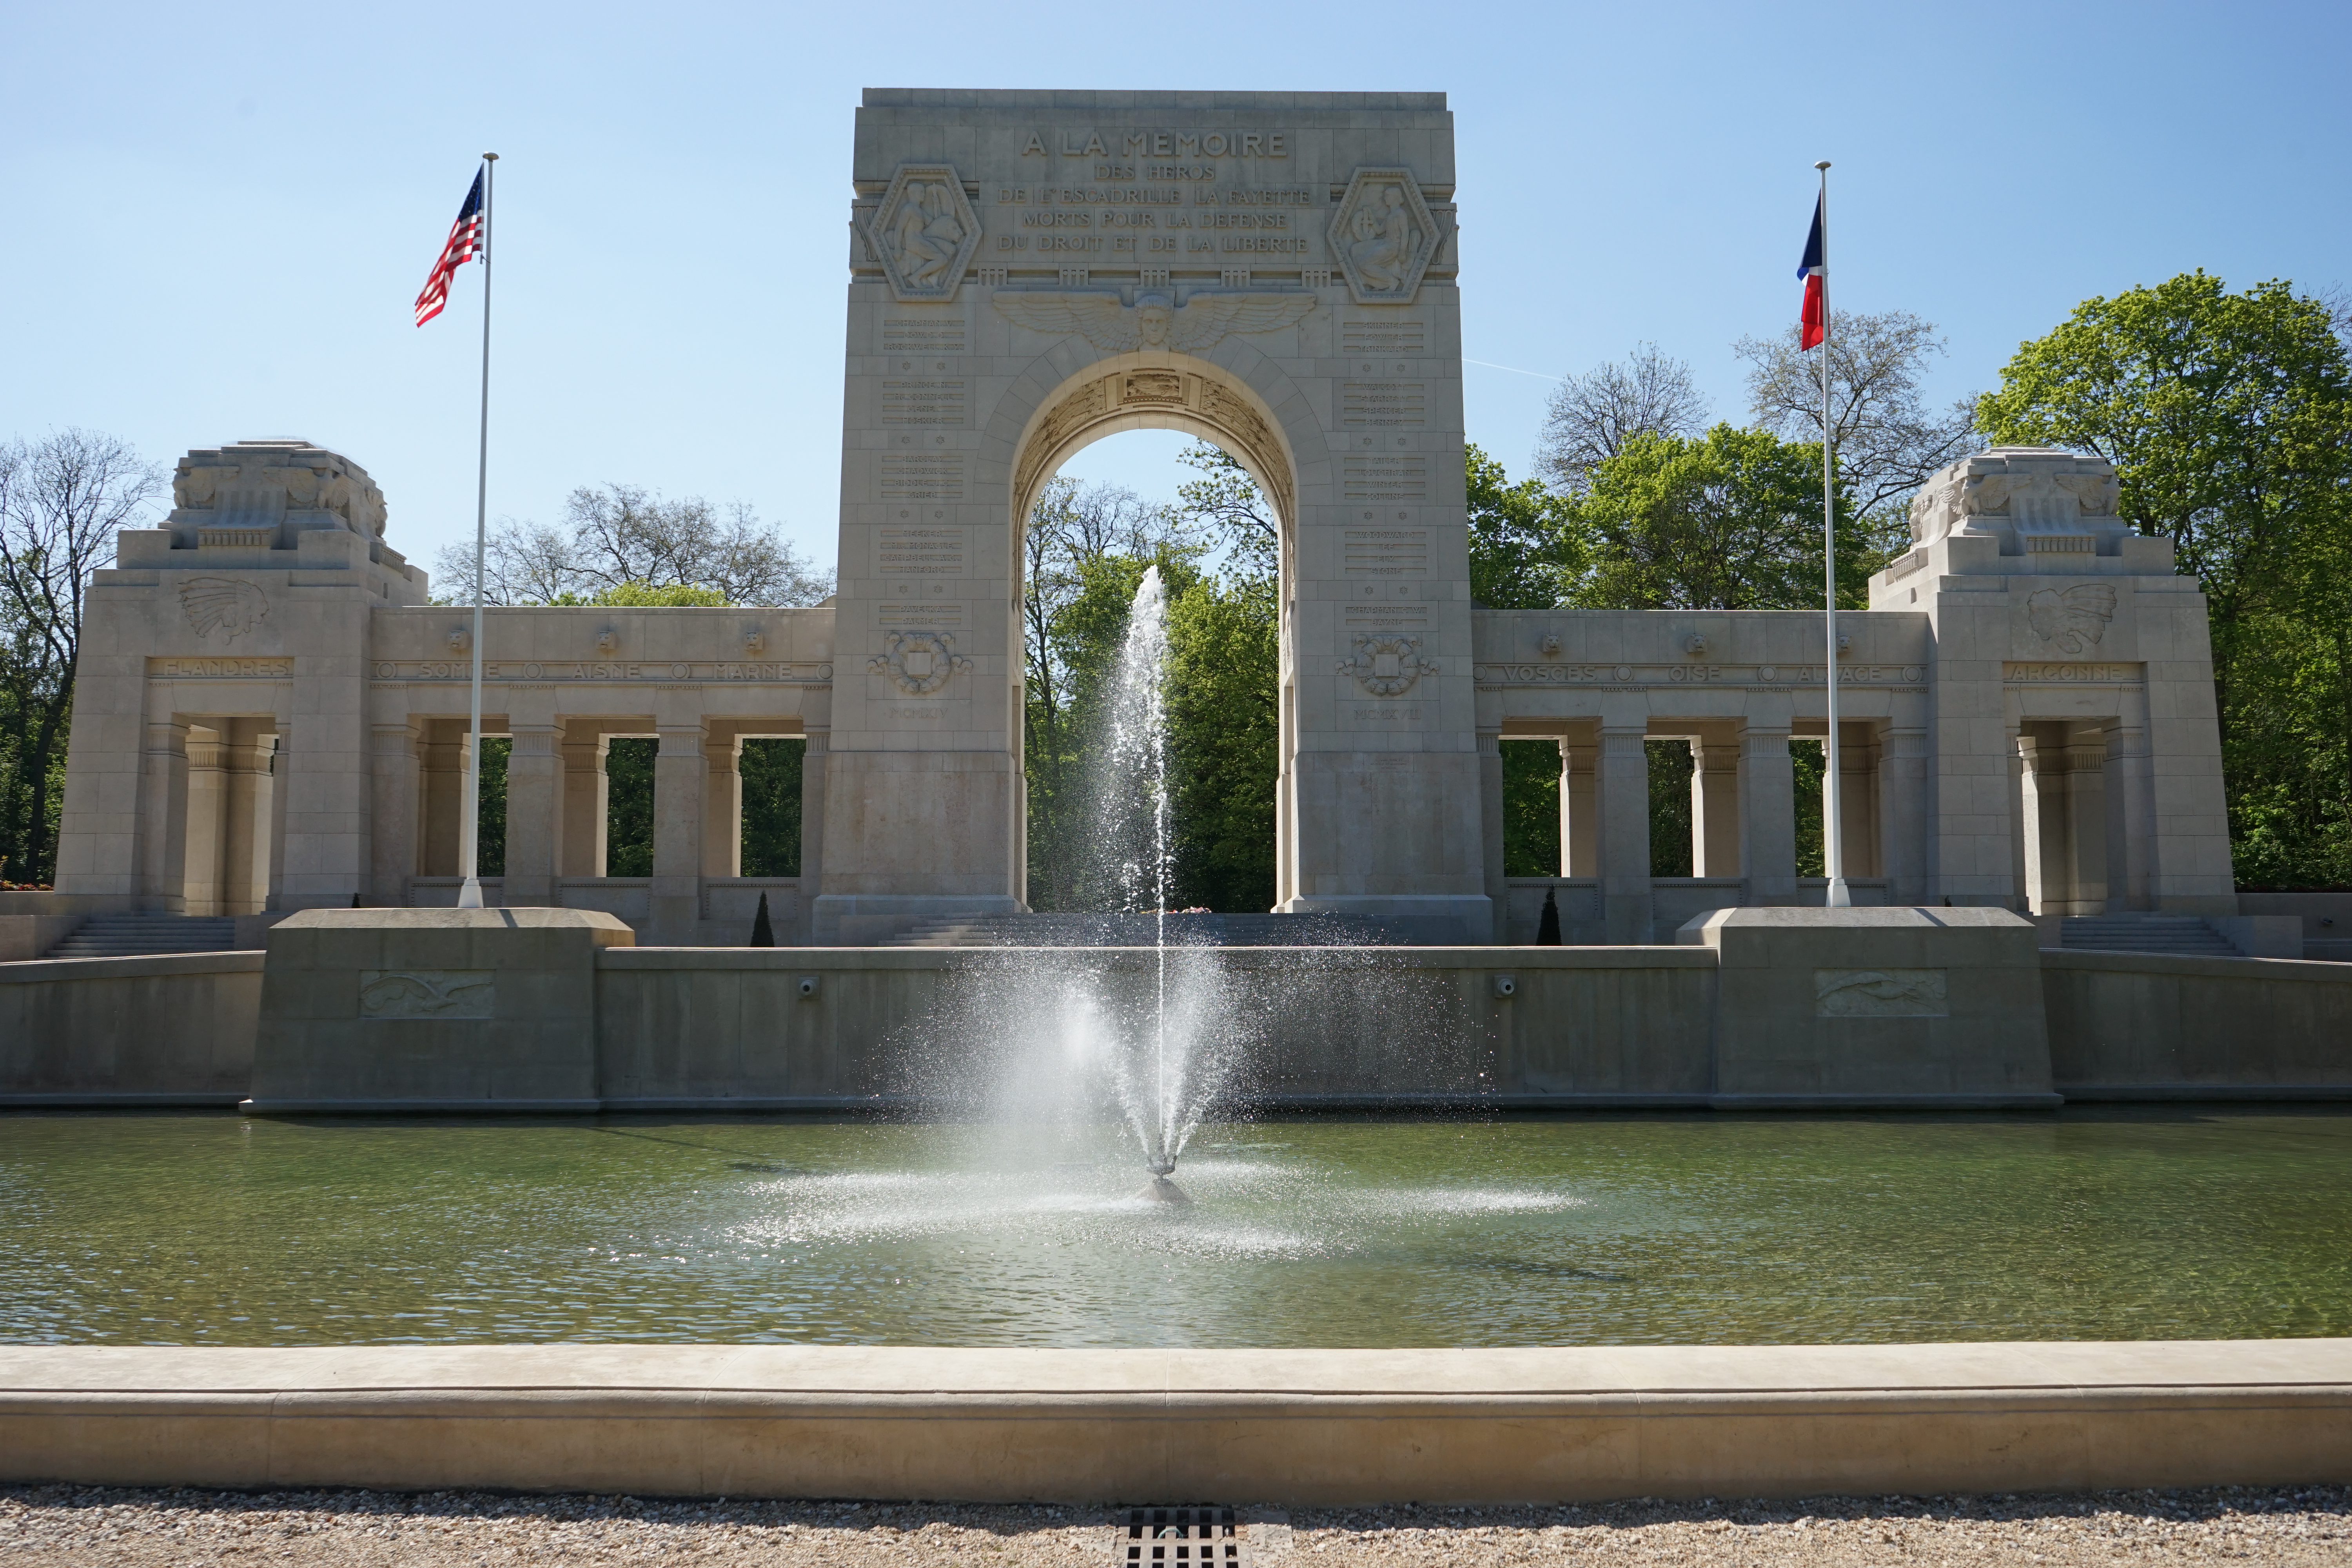 A large fountain is in front of the memorial cemetery building.